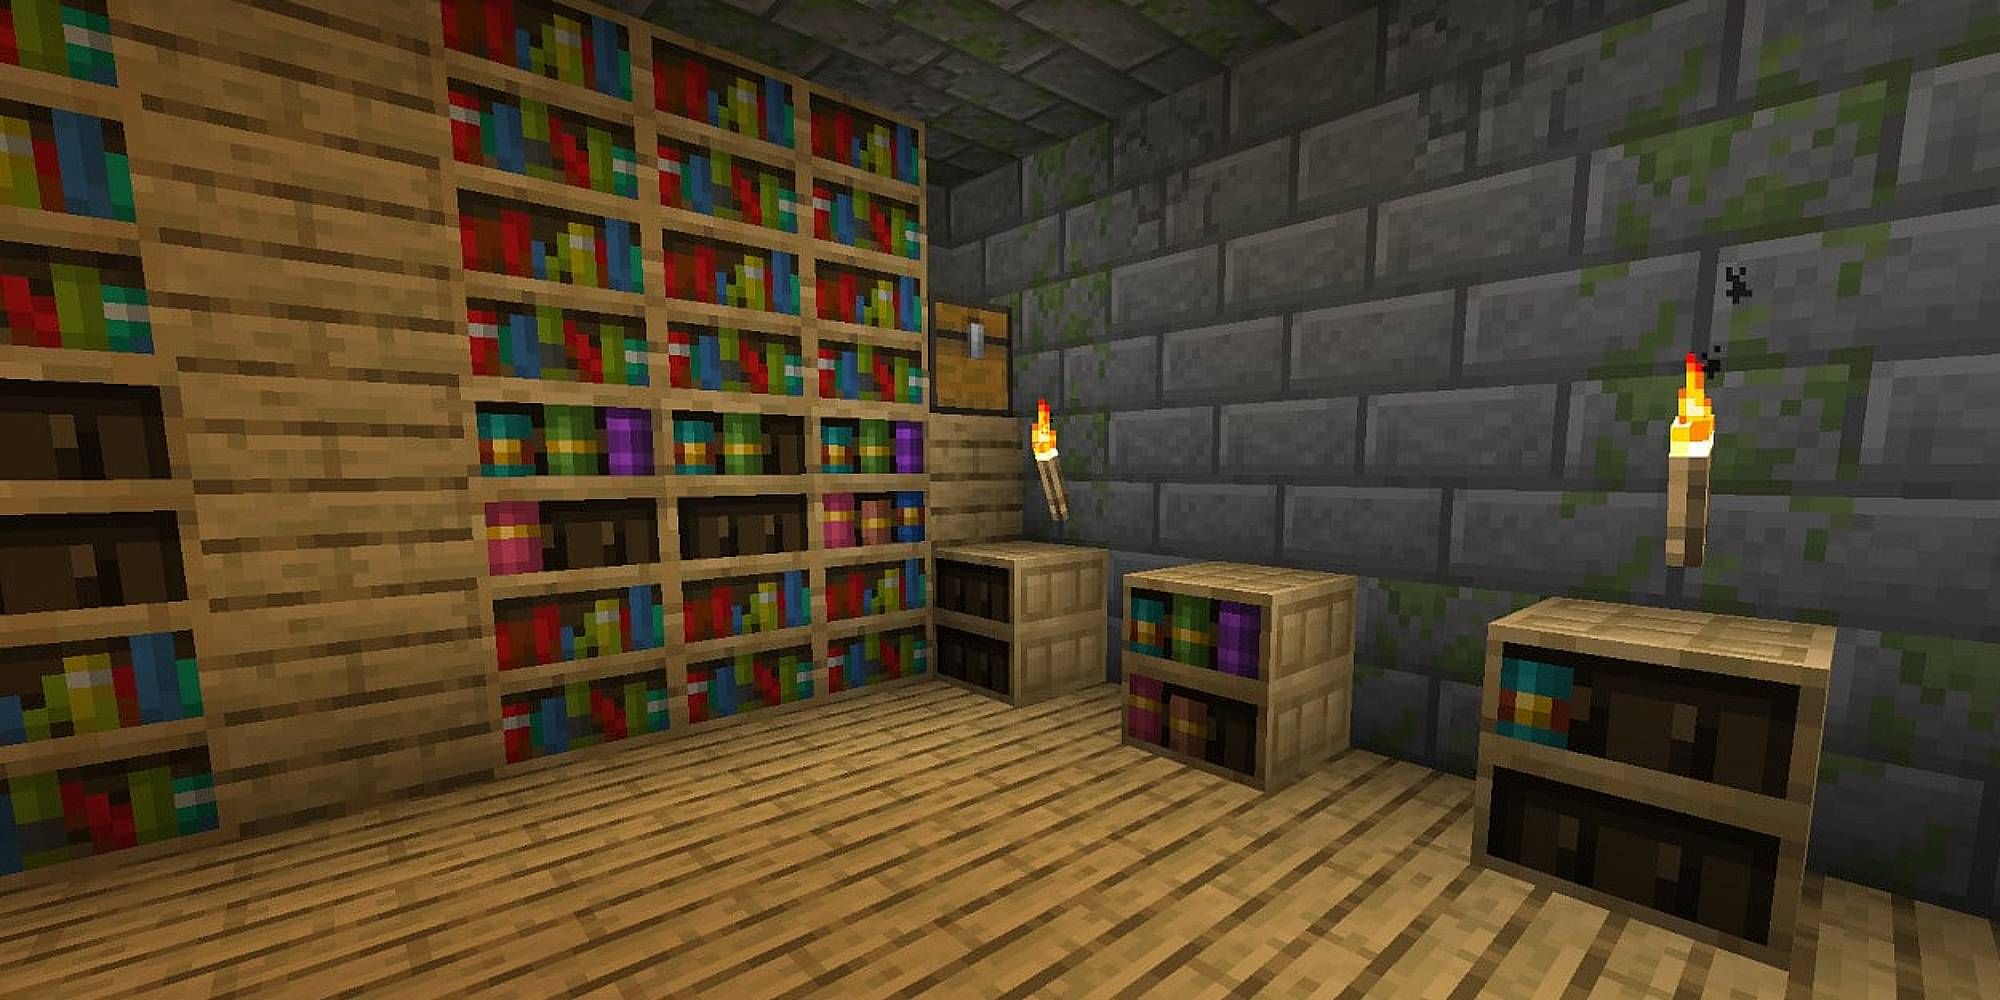 A room full of bookshelves and torches is in a stony room